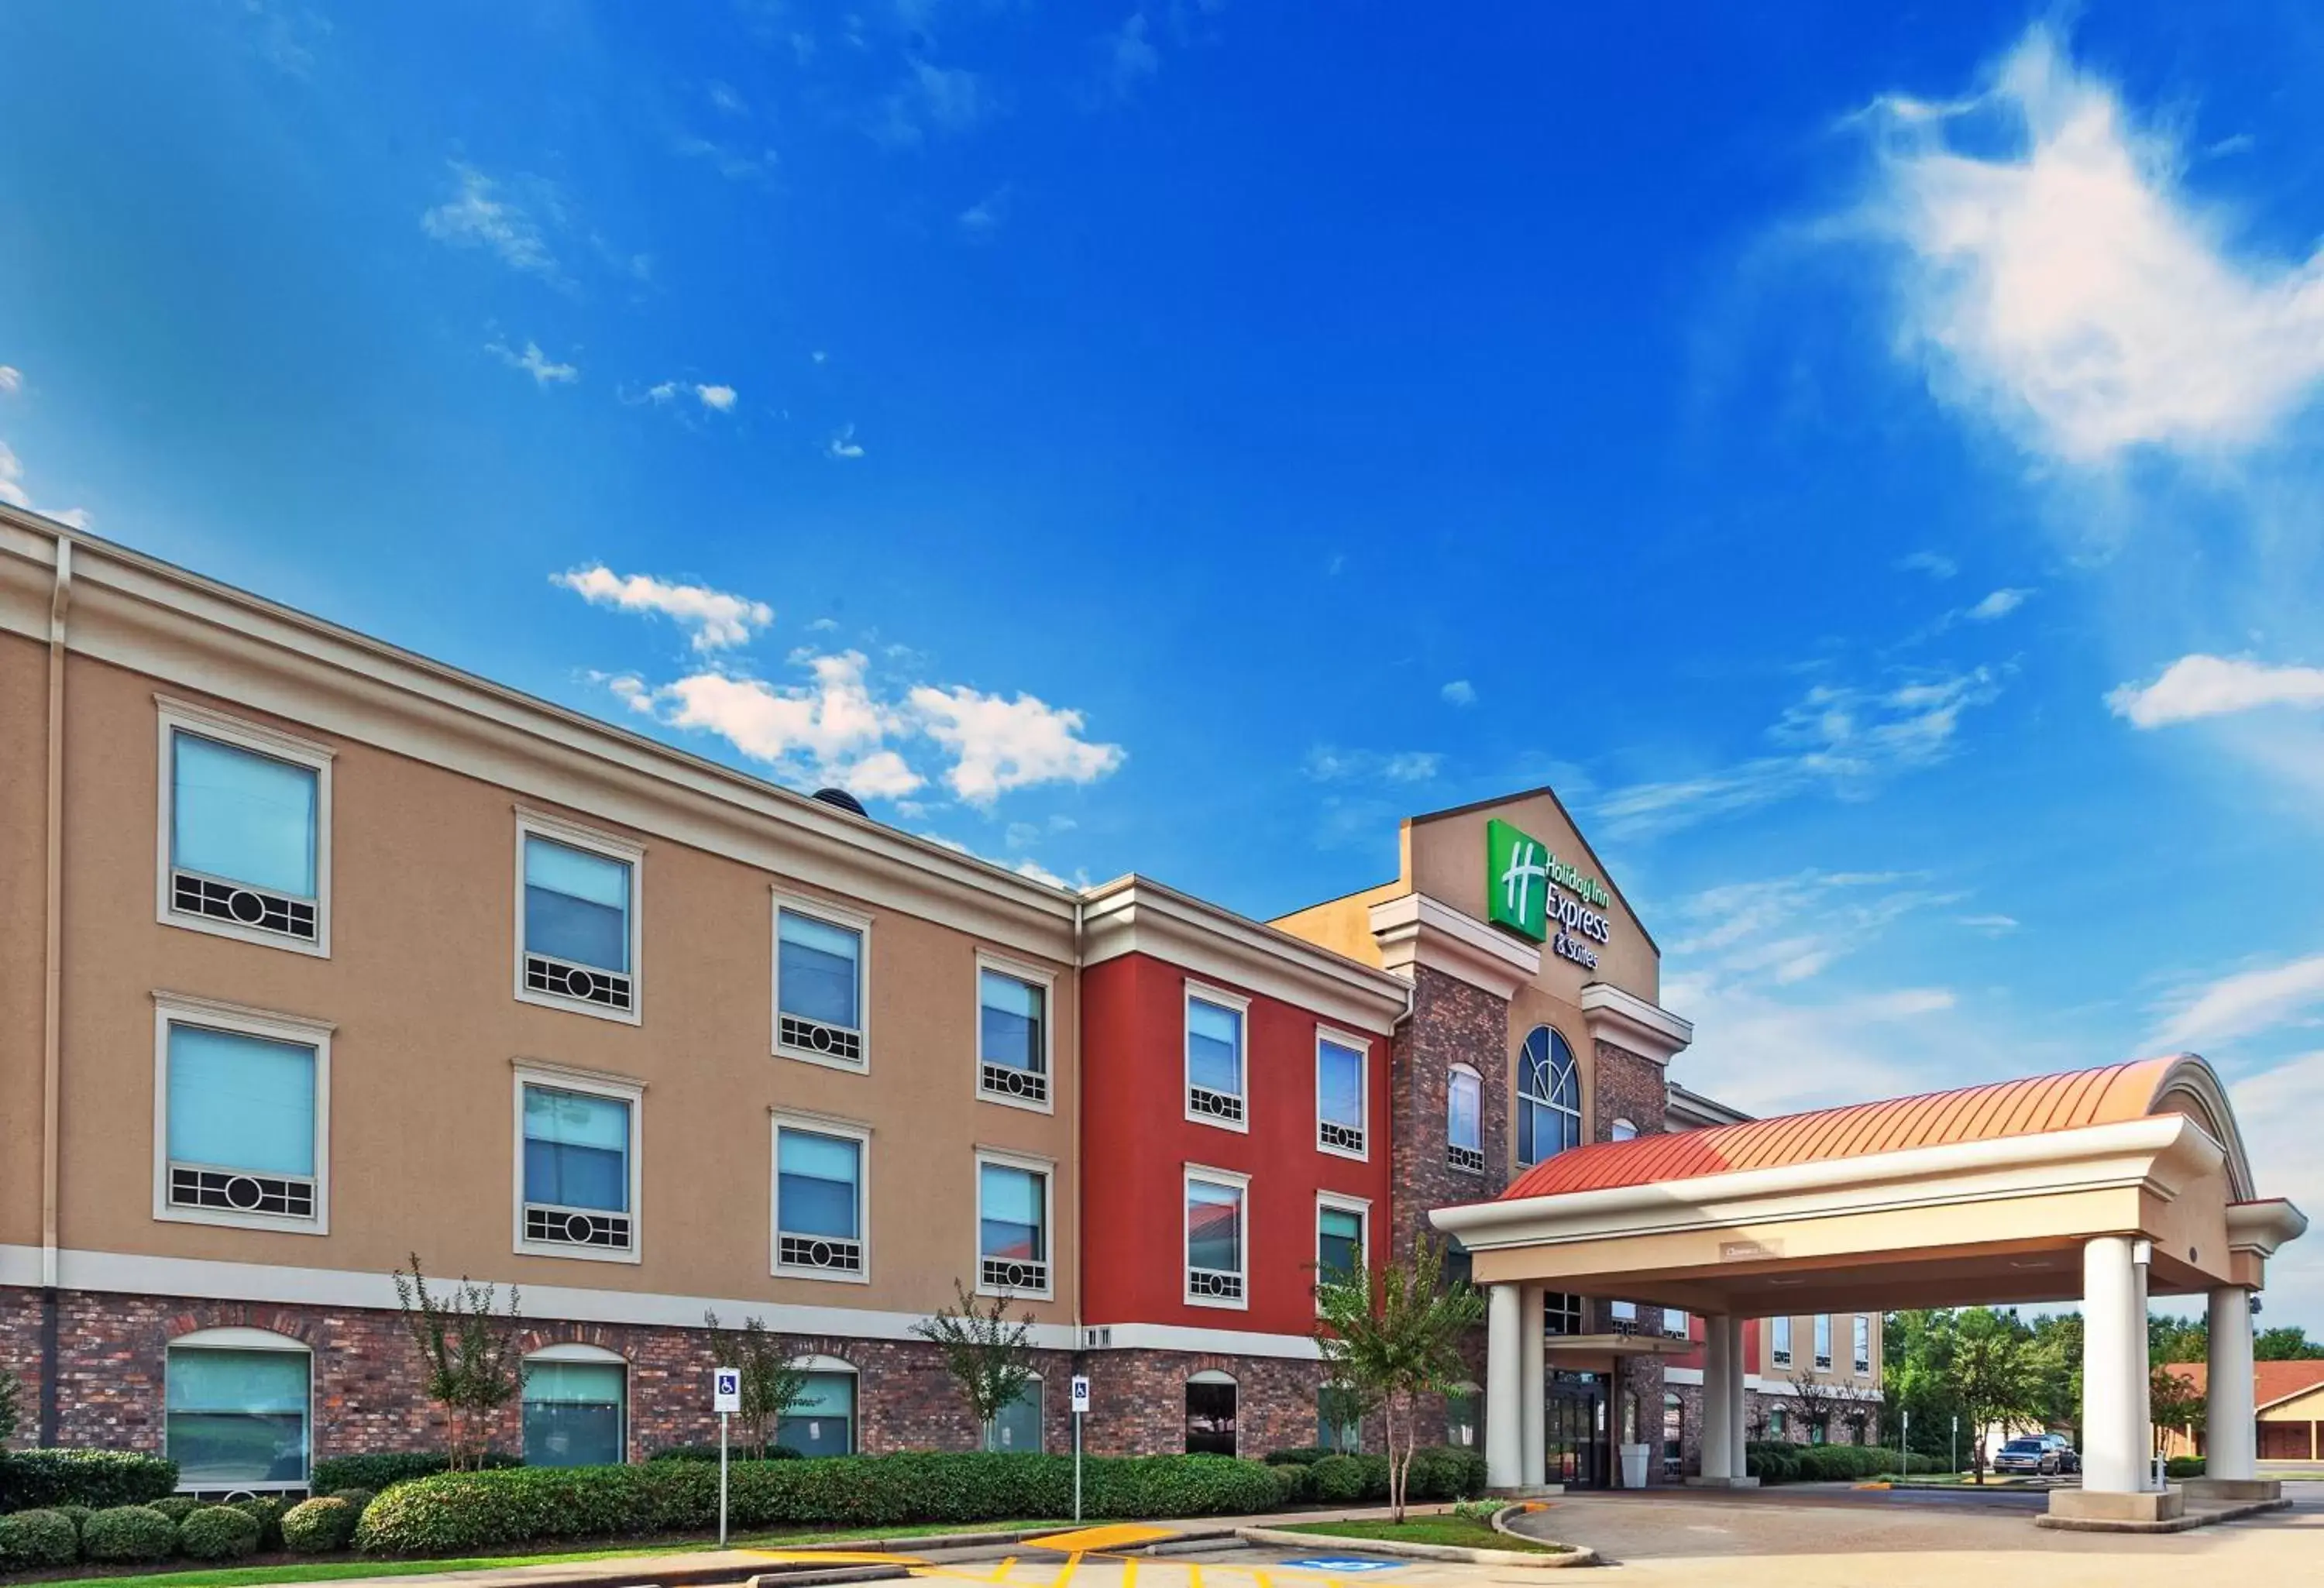 Property Building in Holiday Inn Express Hotel and Suites Jasper